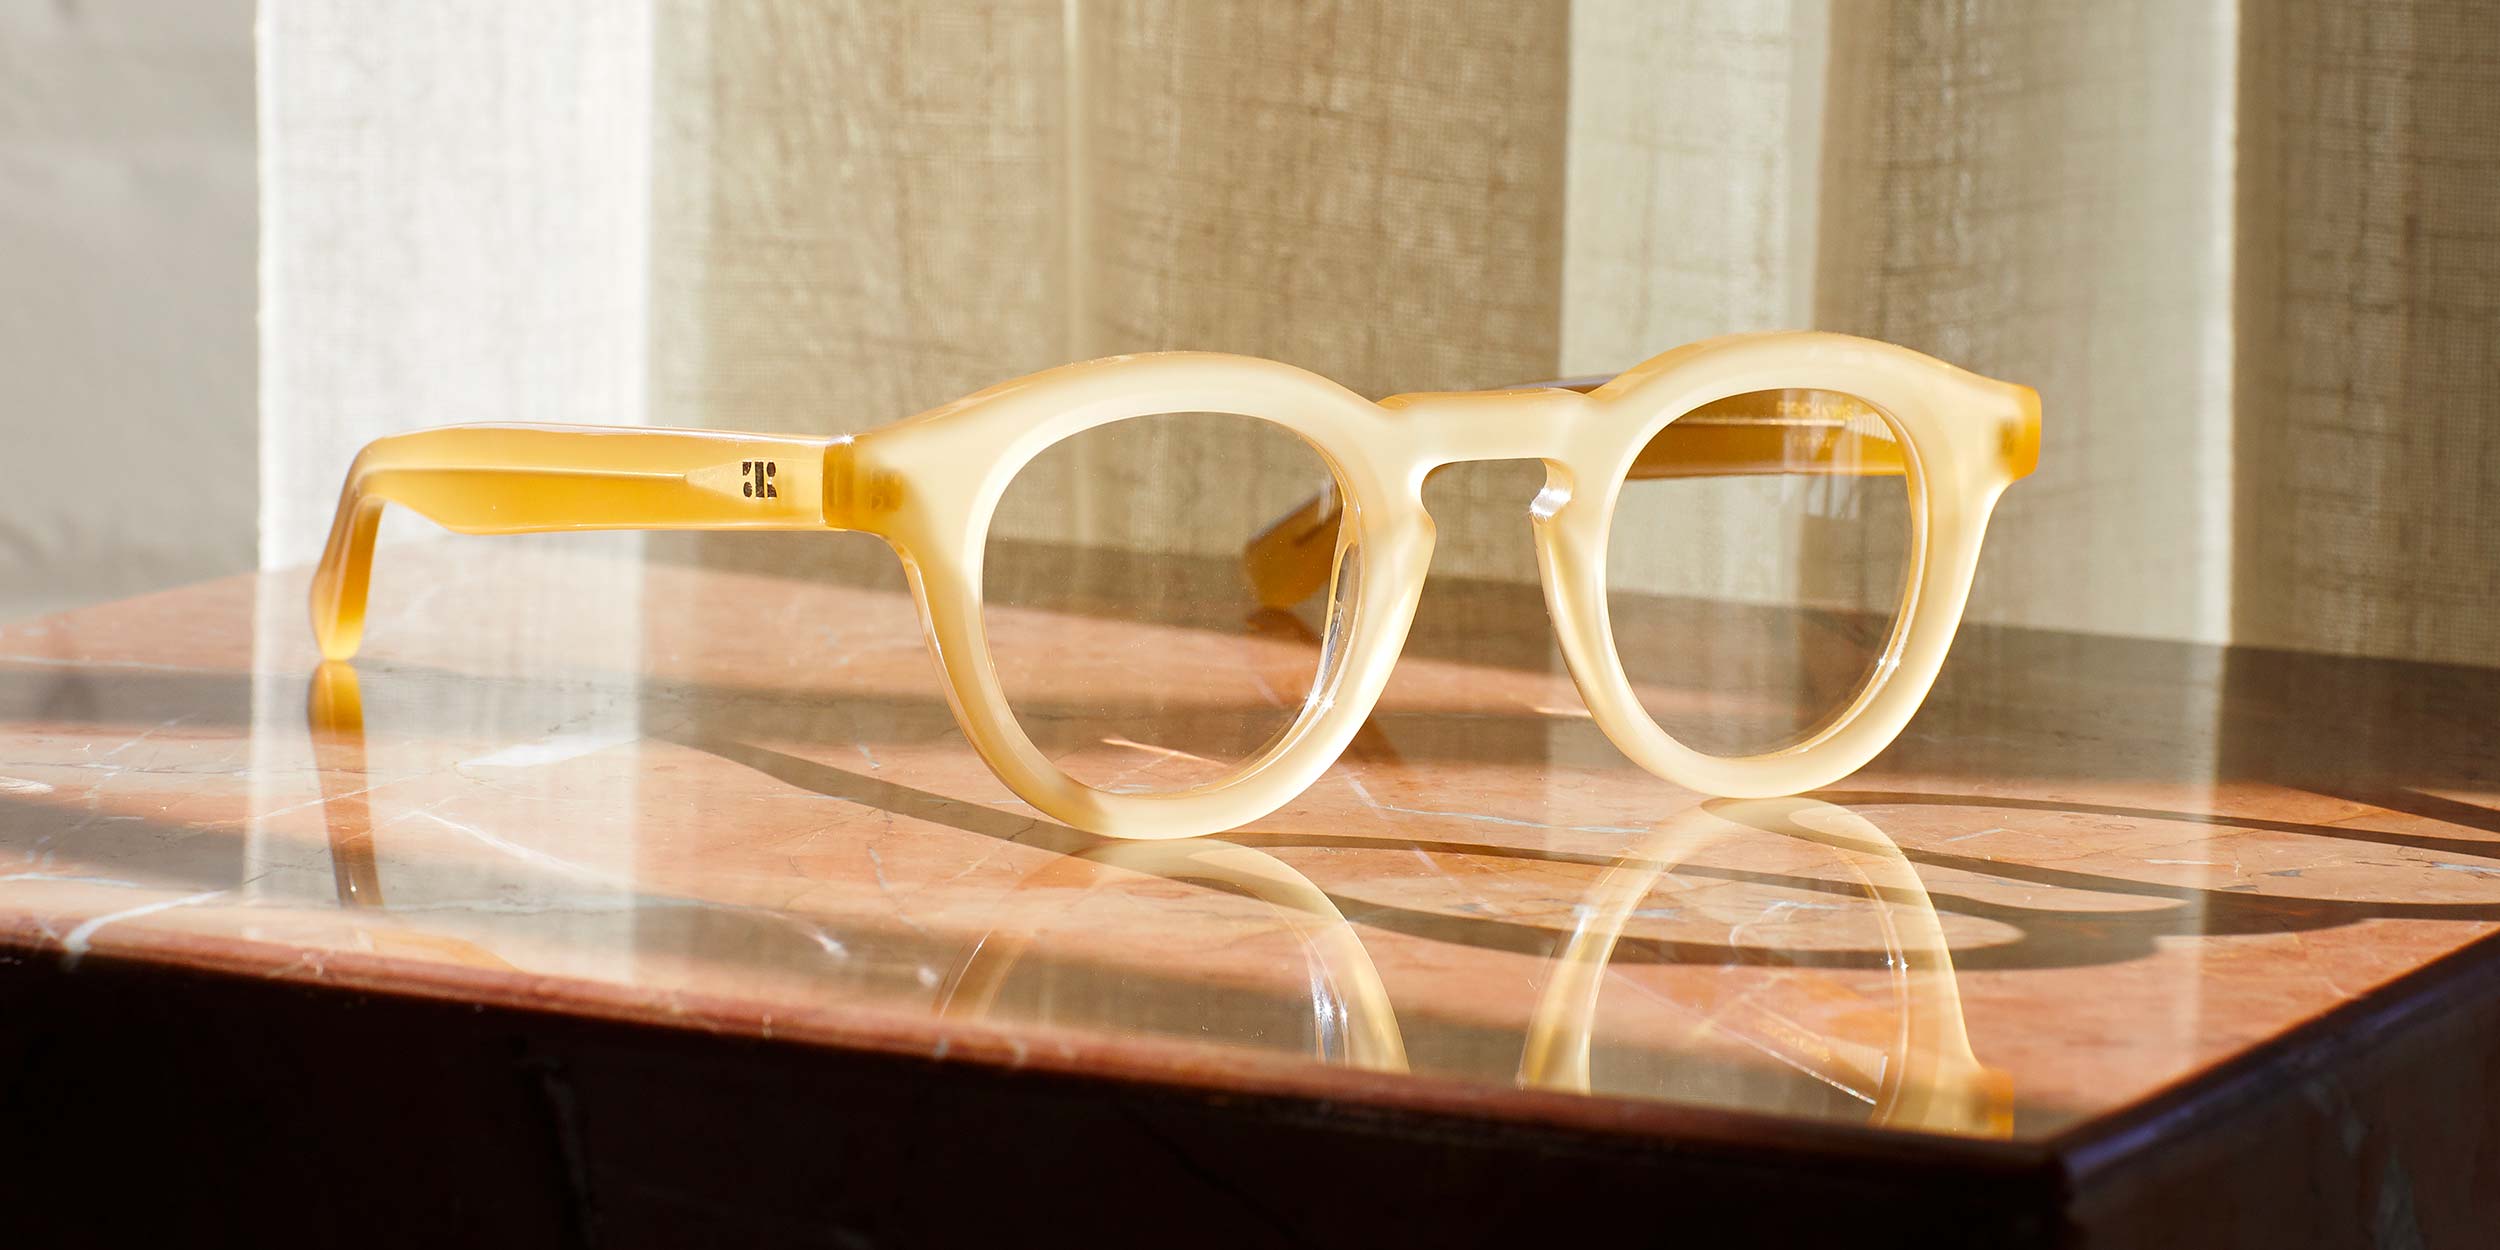 Photo Details of Jude Clear Reading Glasses in a room